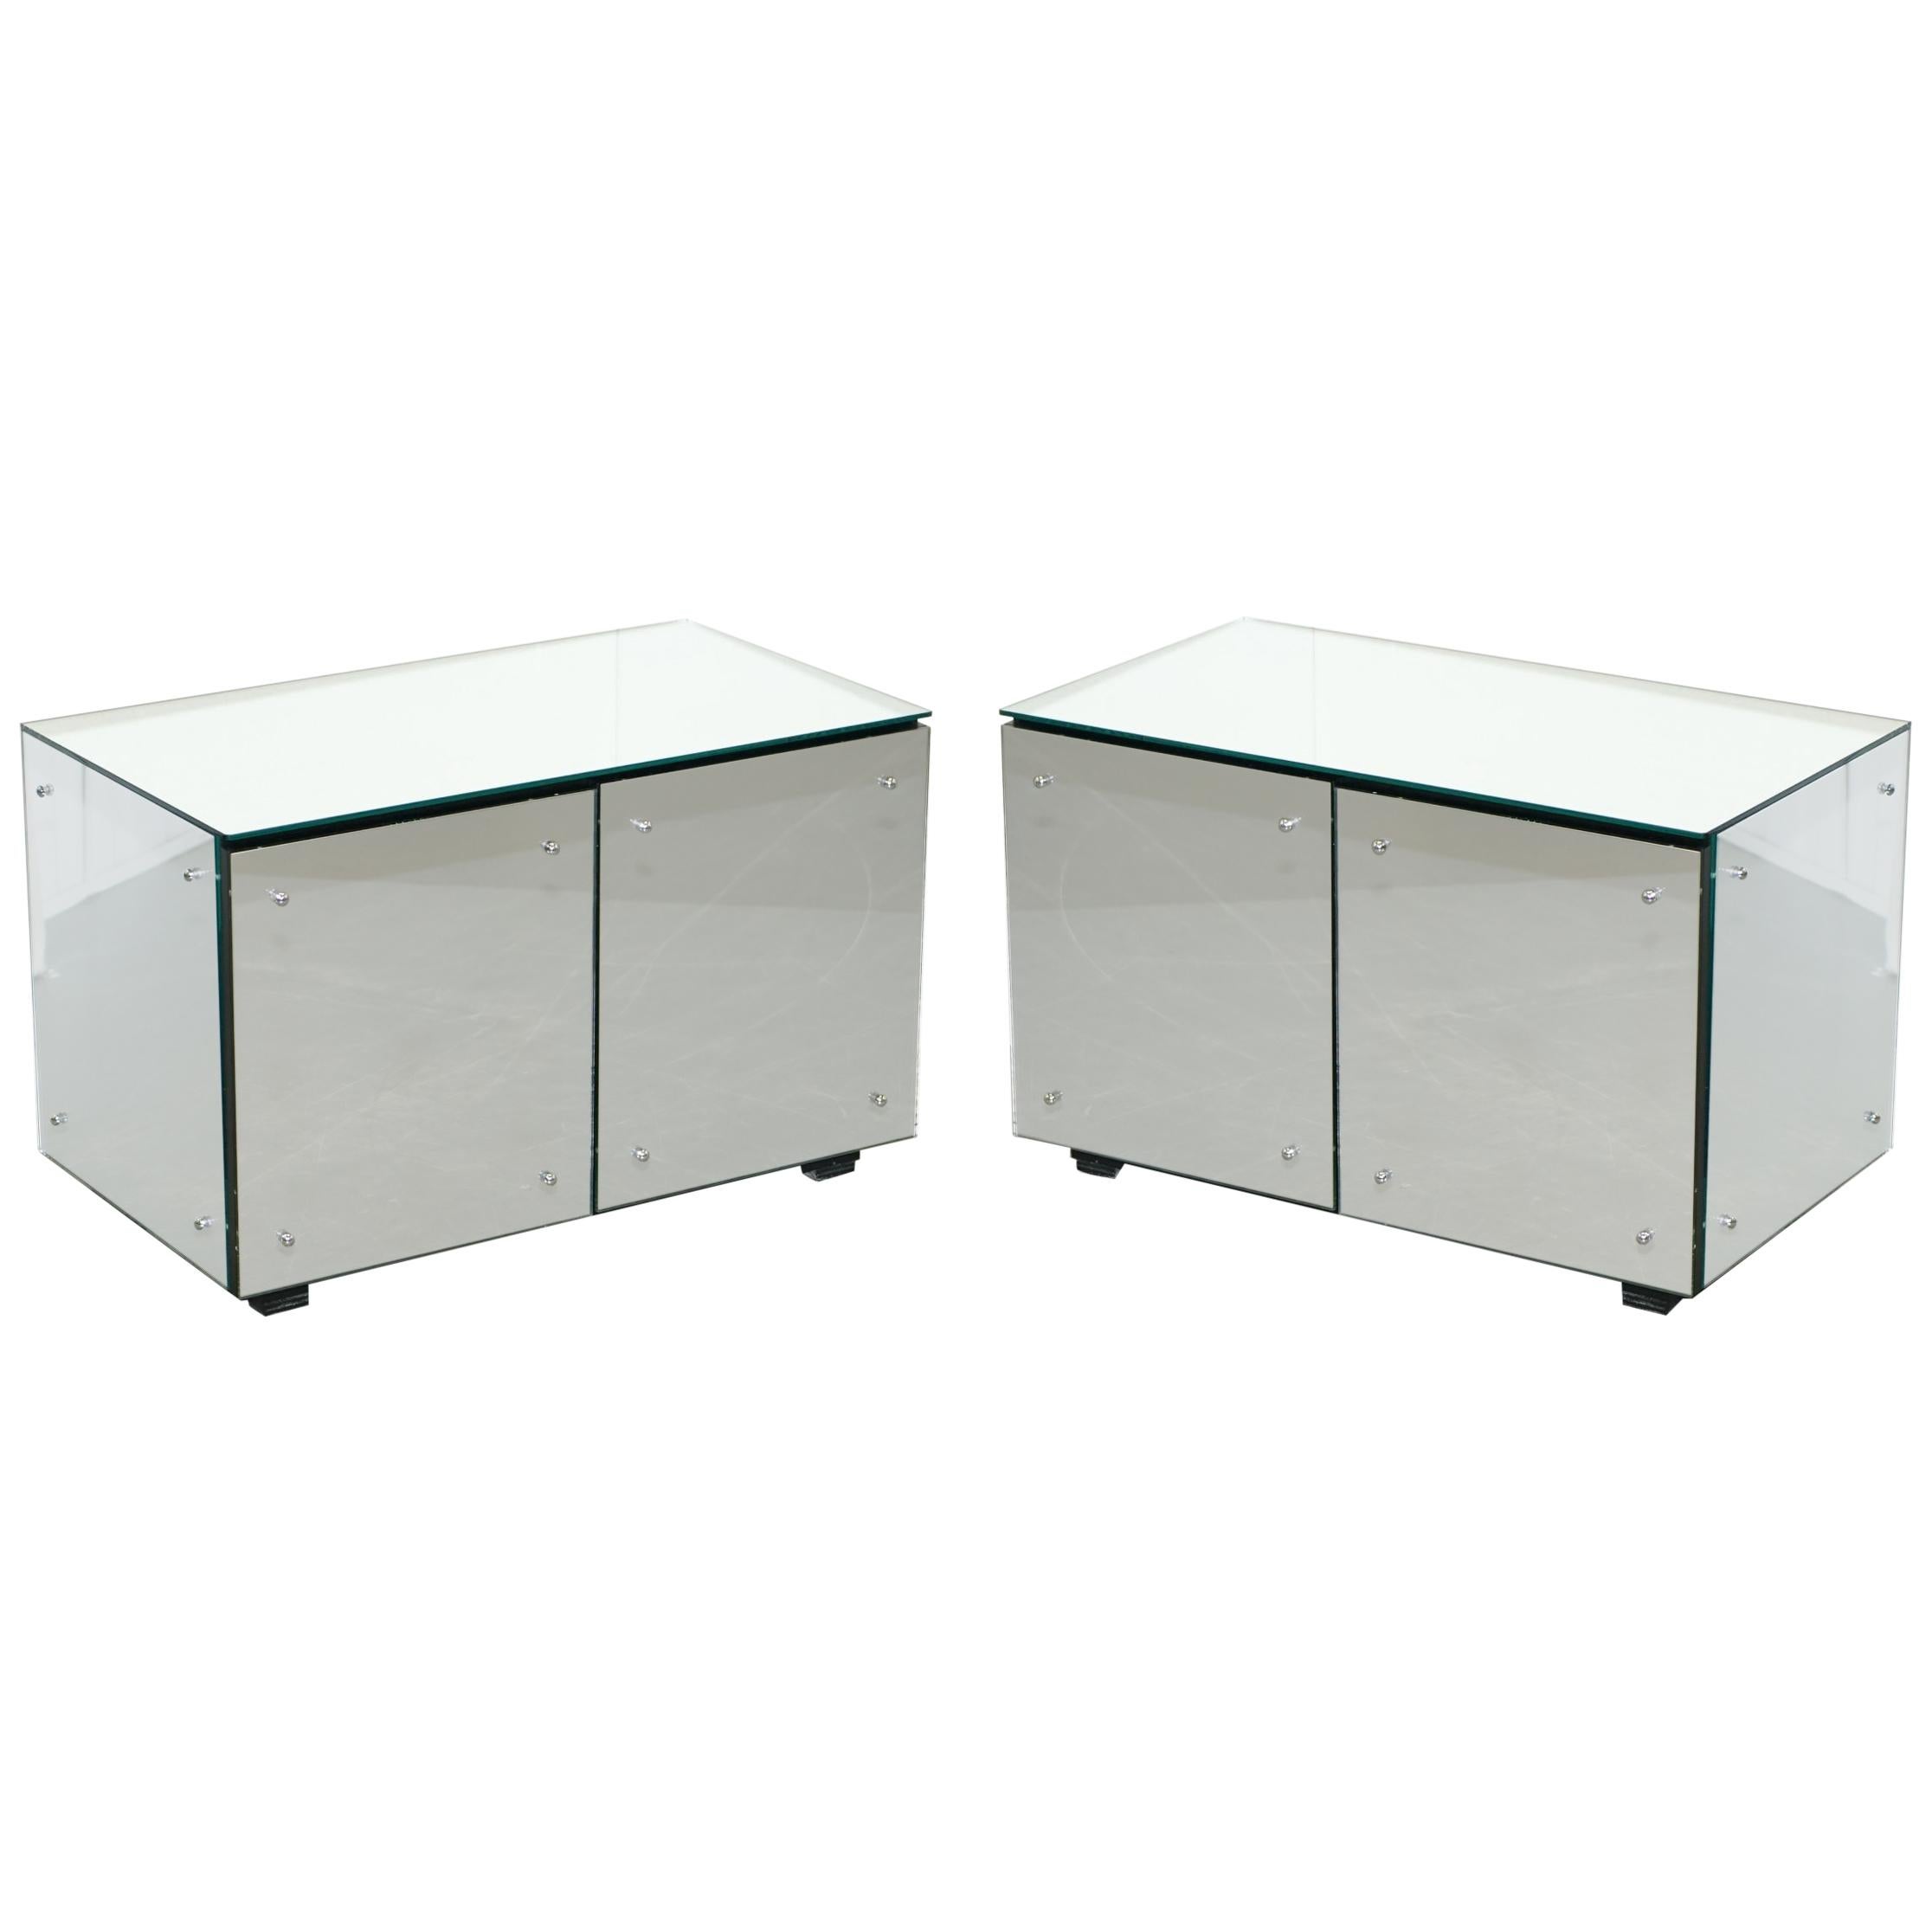 Lovely Pair of Mirrored Tapered Glass Large Side Table Cupboards Ideal Storage